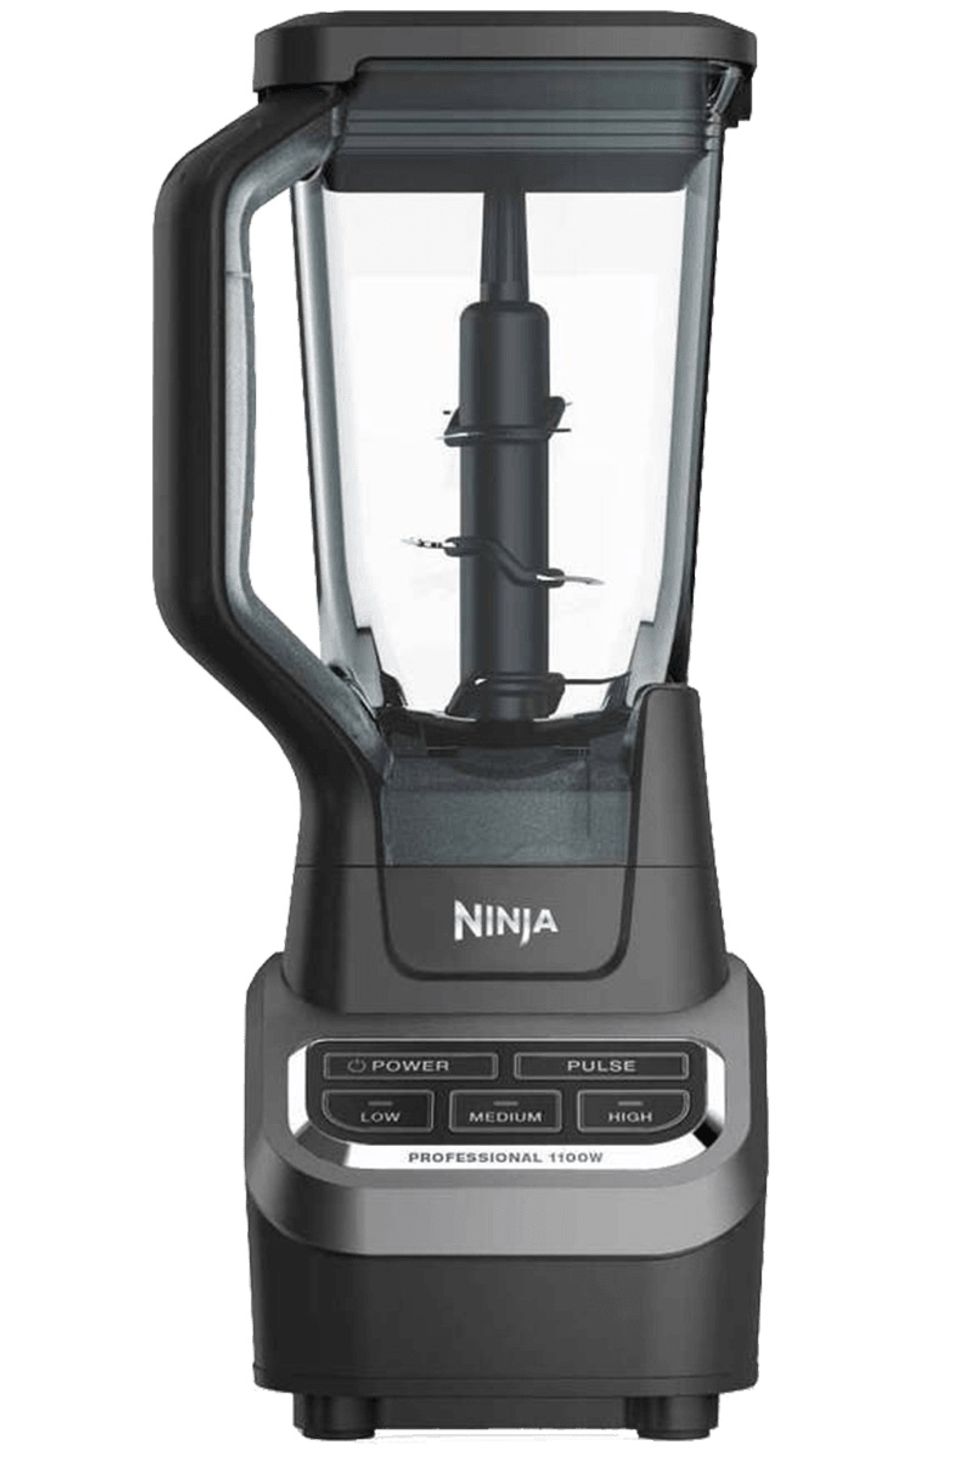 How to use a Ninja blender?